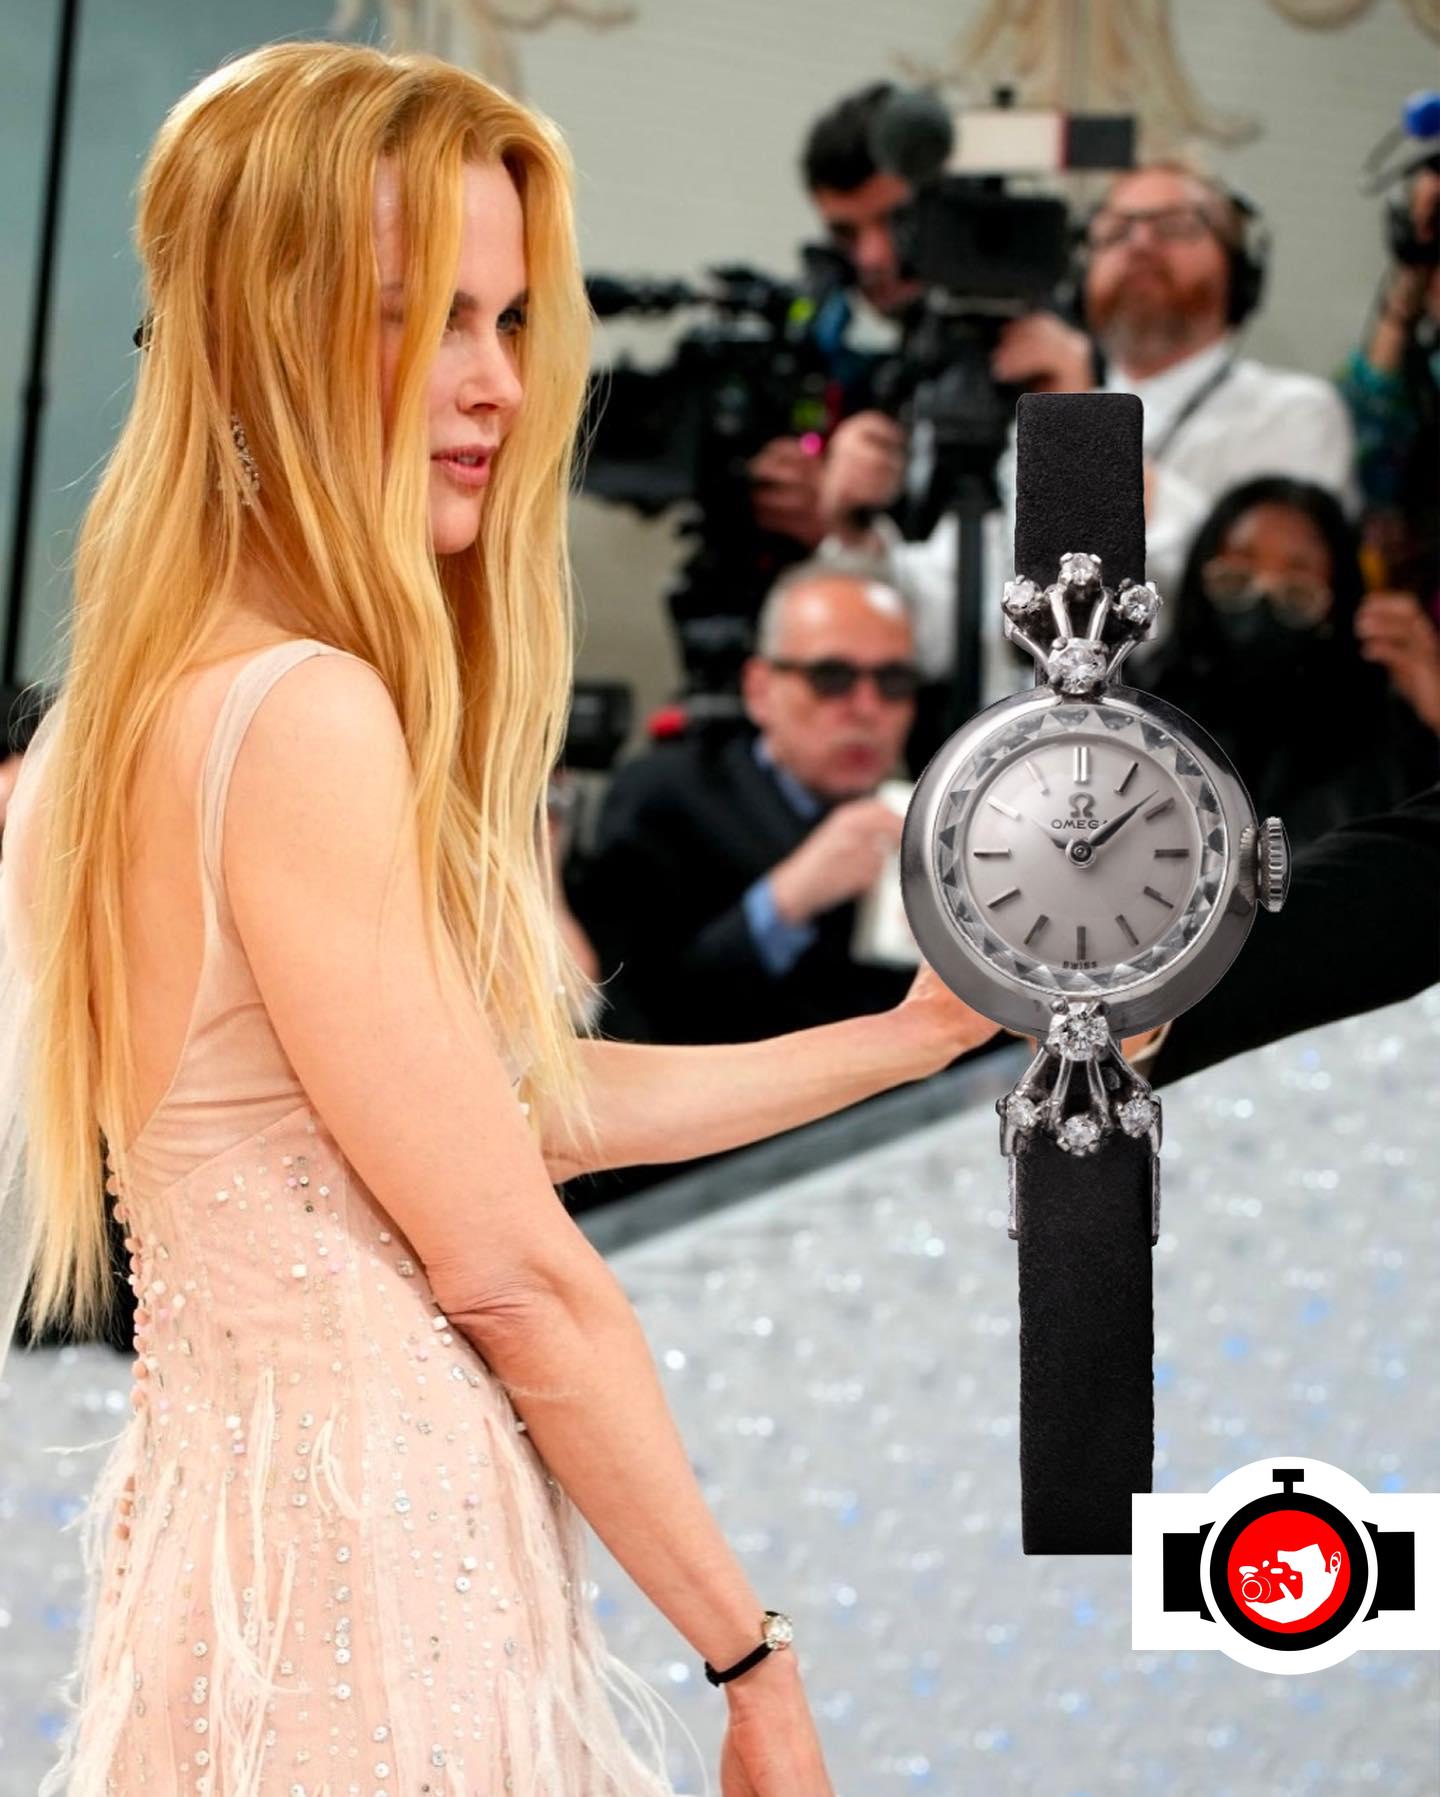 actor Nicole Kidman spotted wearing a Omega 